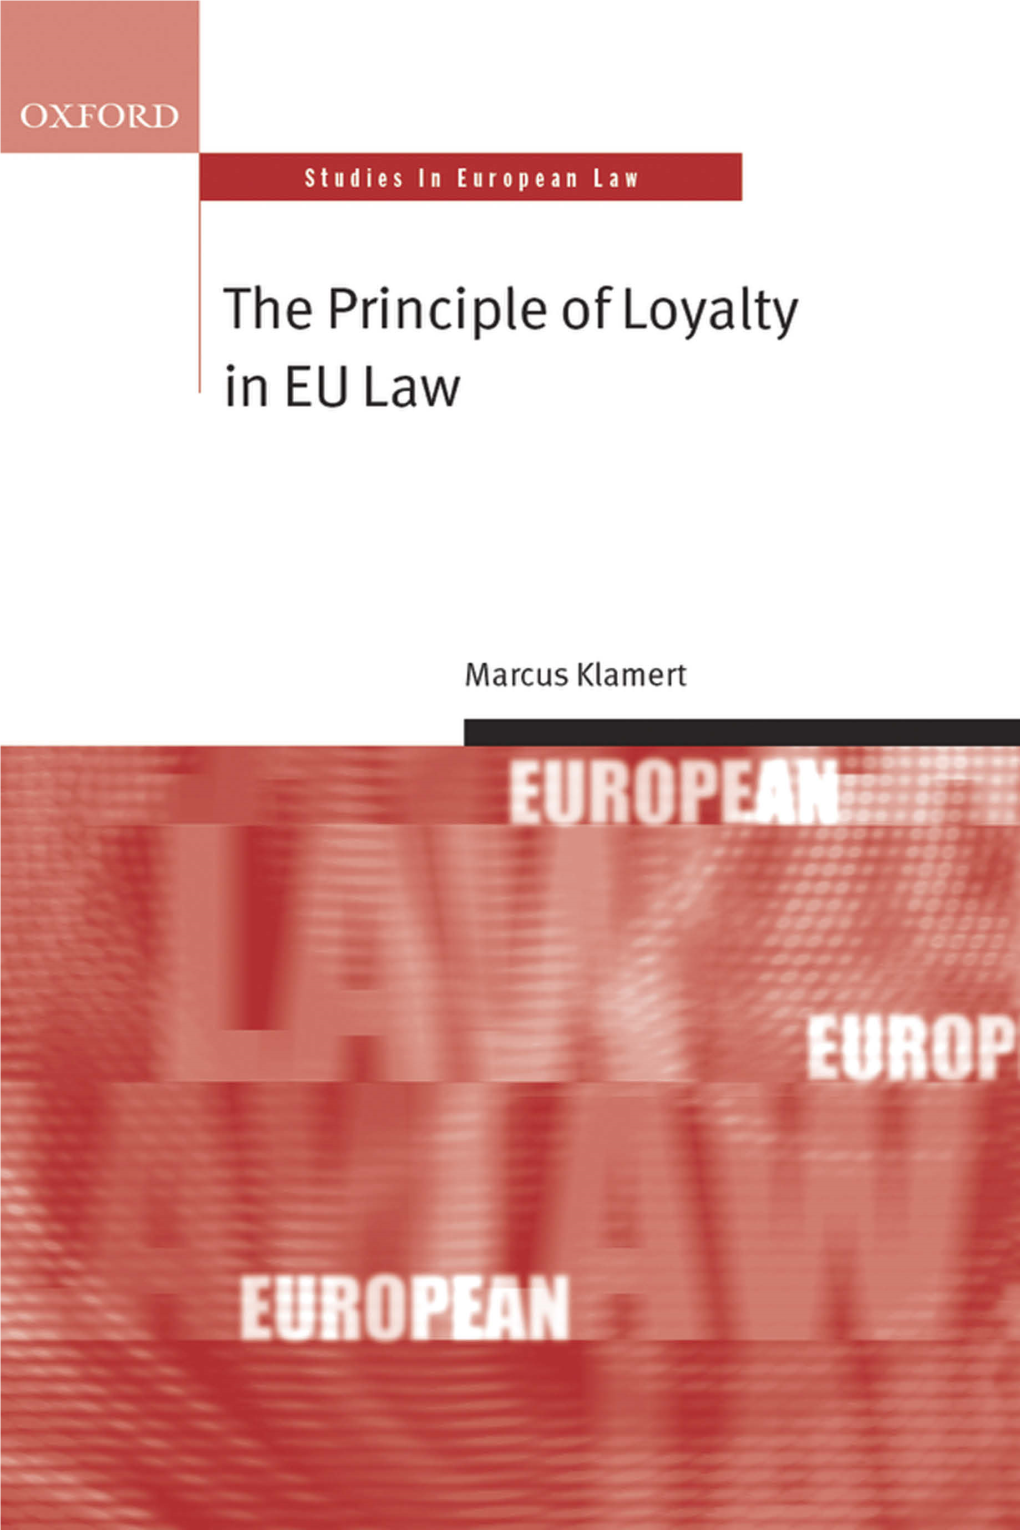 The Principle of Loyalty in European Union Law